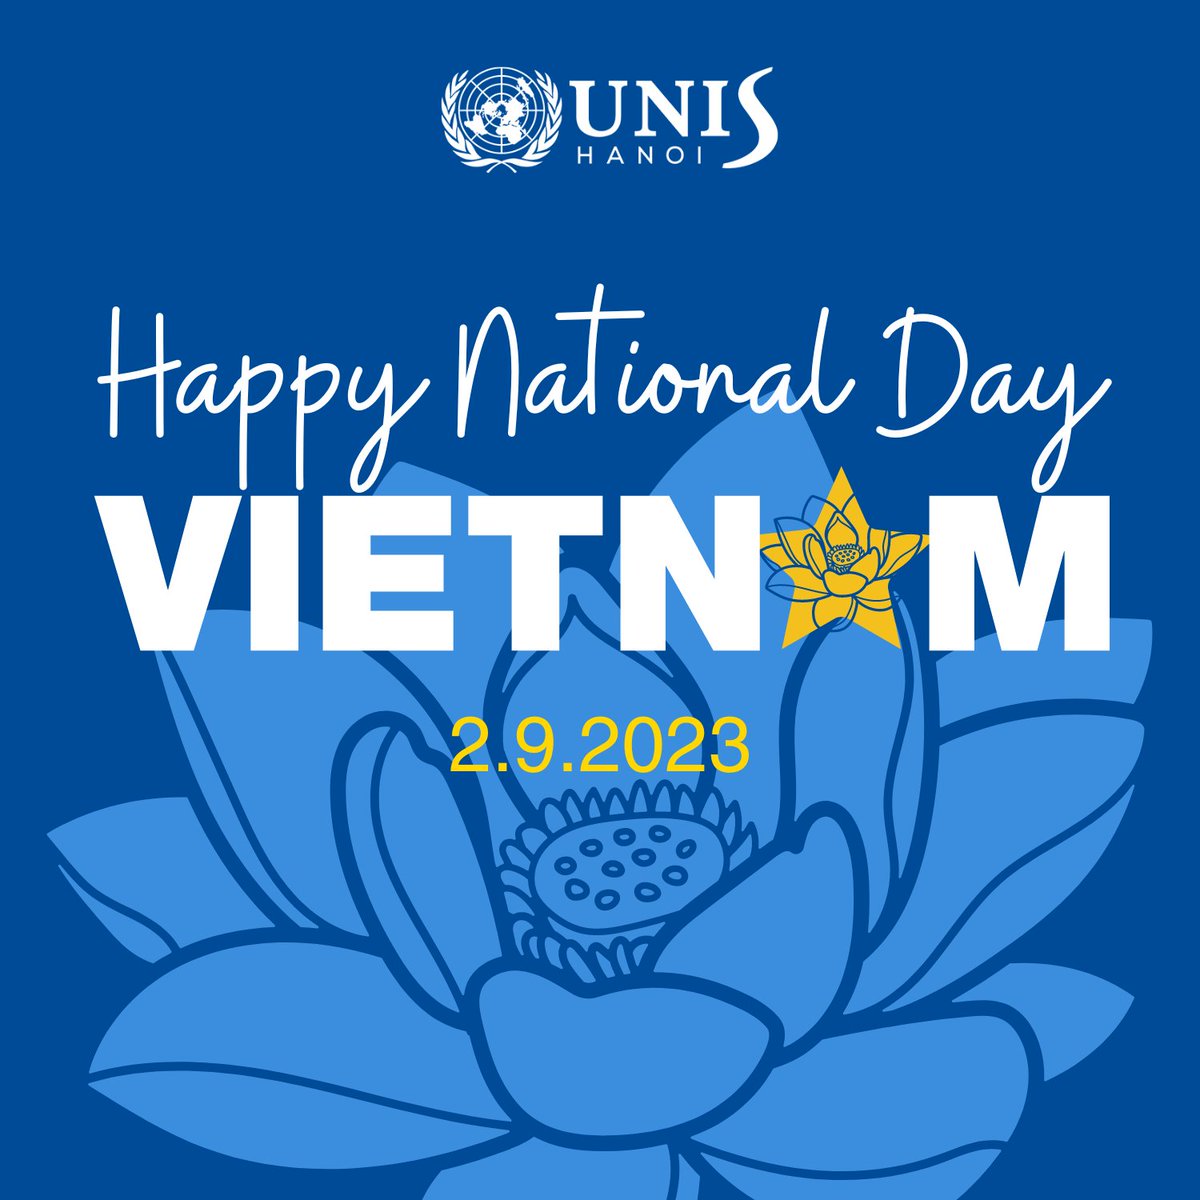 On Vietnam's National Day, #UNISHanoi would like to extend our warmest congratulations to the people of Vietnam and wish everyone a happy holiday.
#Vietnam #VietnamNationalDay #UNiquelyUNIS #LearningtoInspire